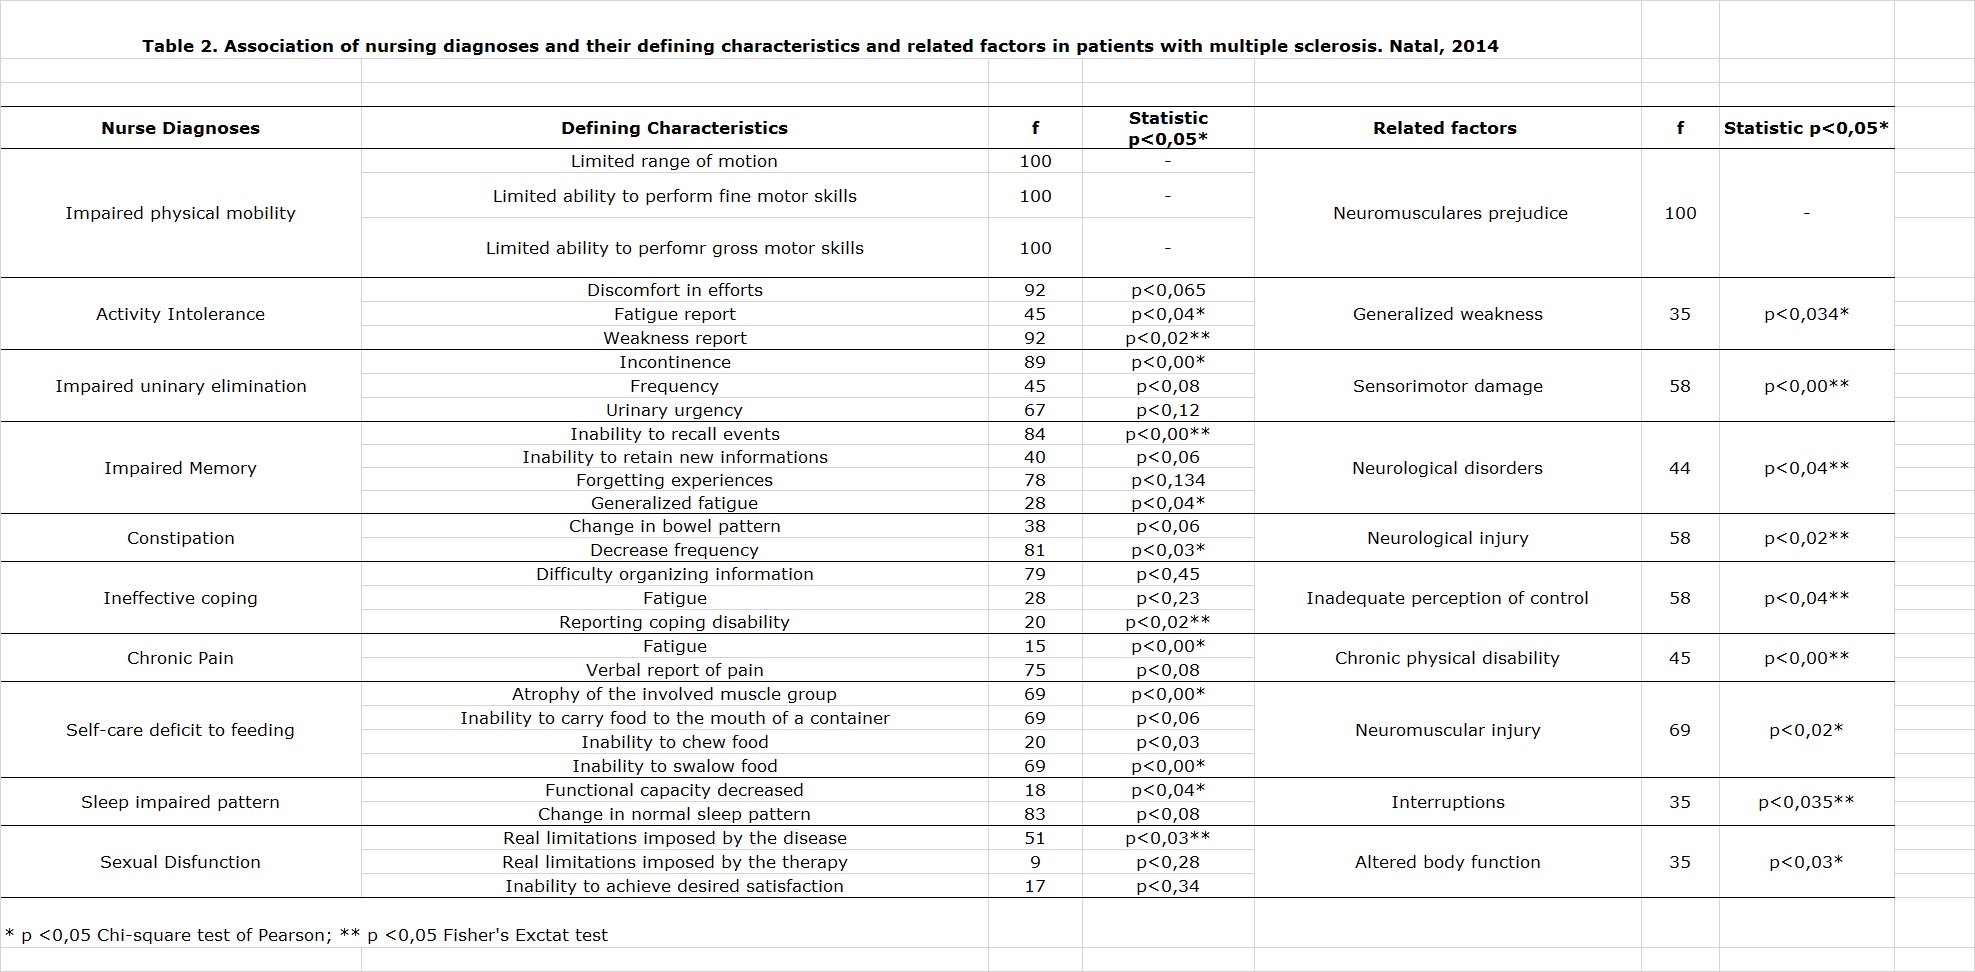 View Of A Profile Of Nursing Diagnoses In Patients With Multiple Sclerosis A Cross Sectional Study Online Brazilian Journal Of Nursing Optic neuritis nursing care plan